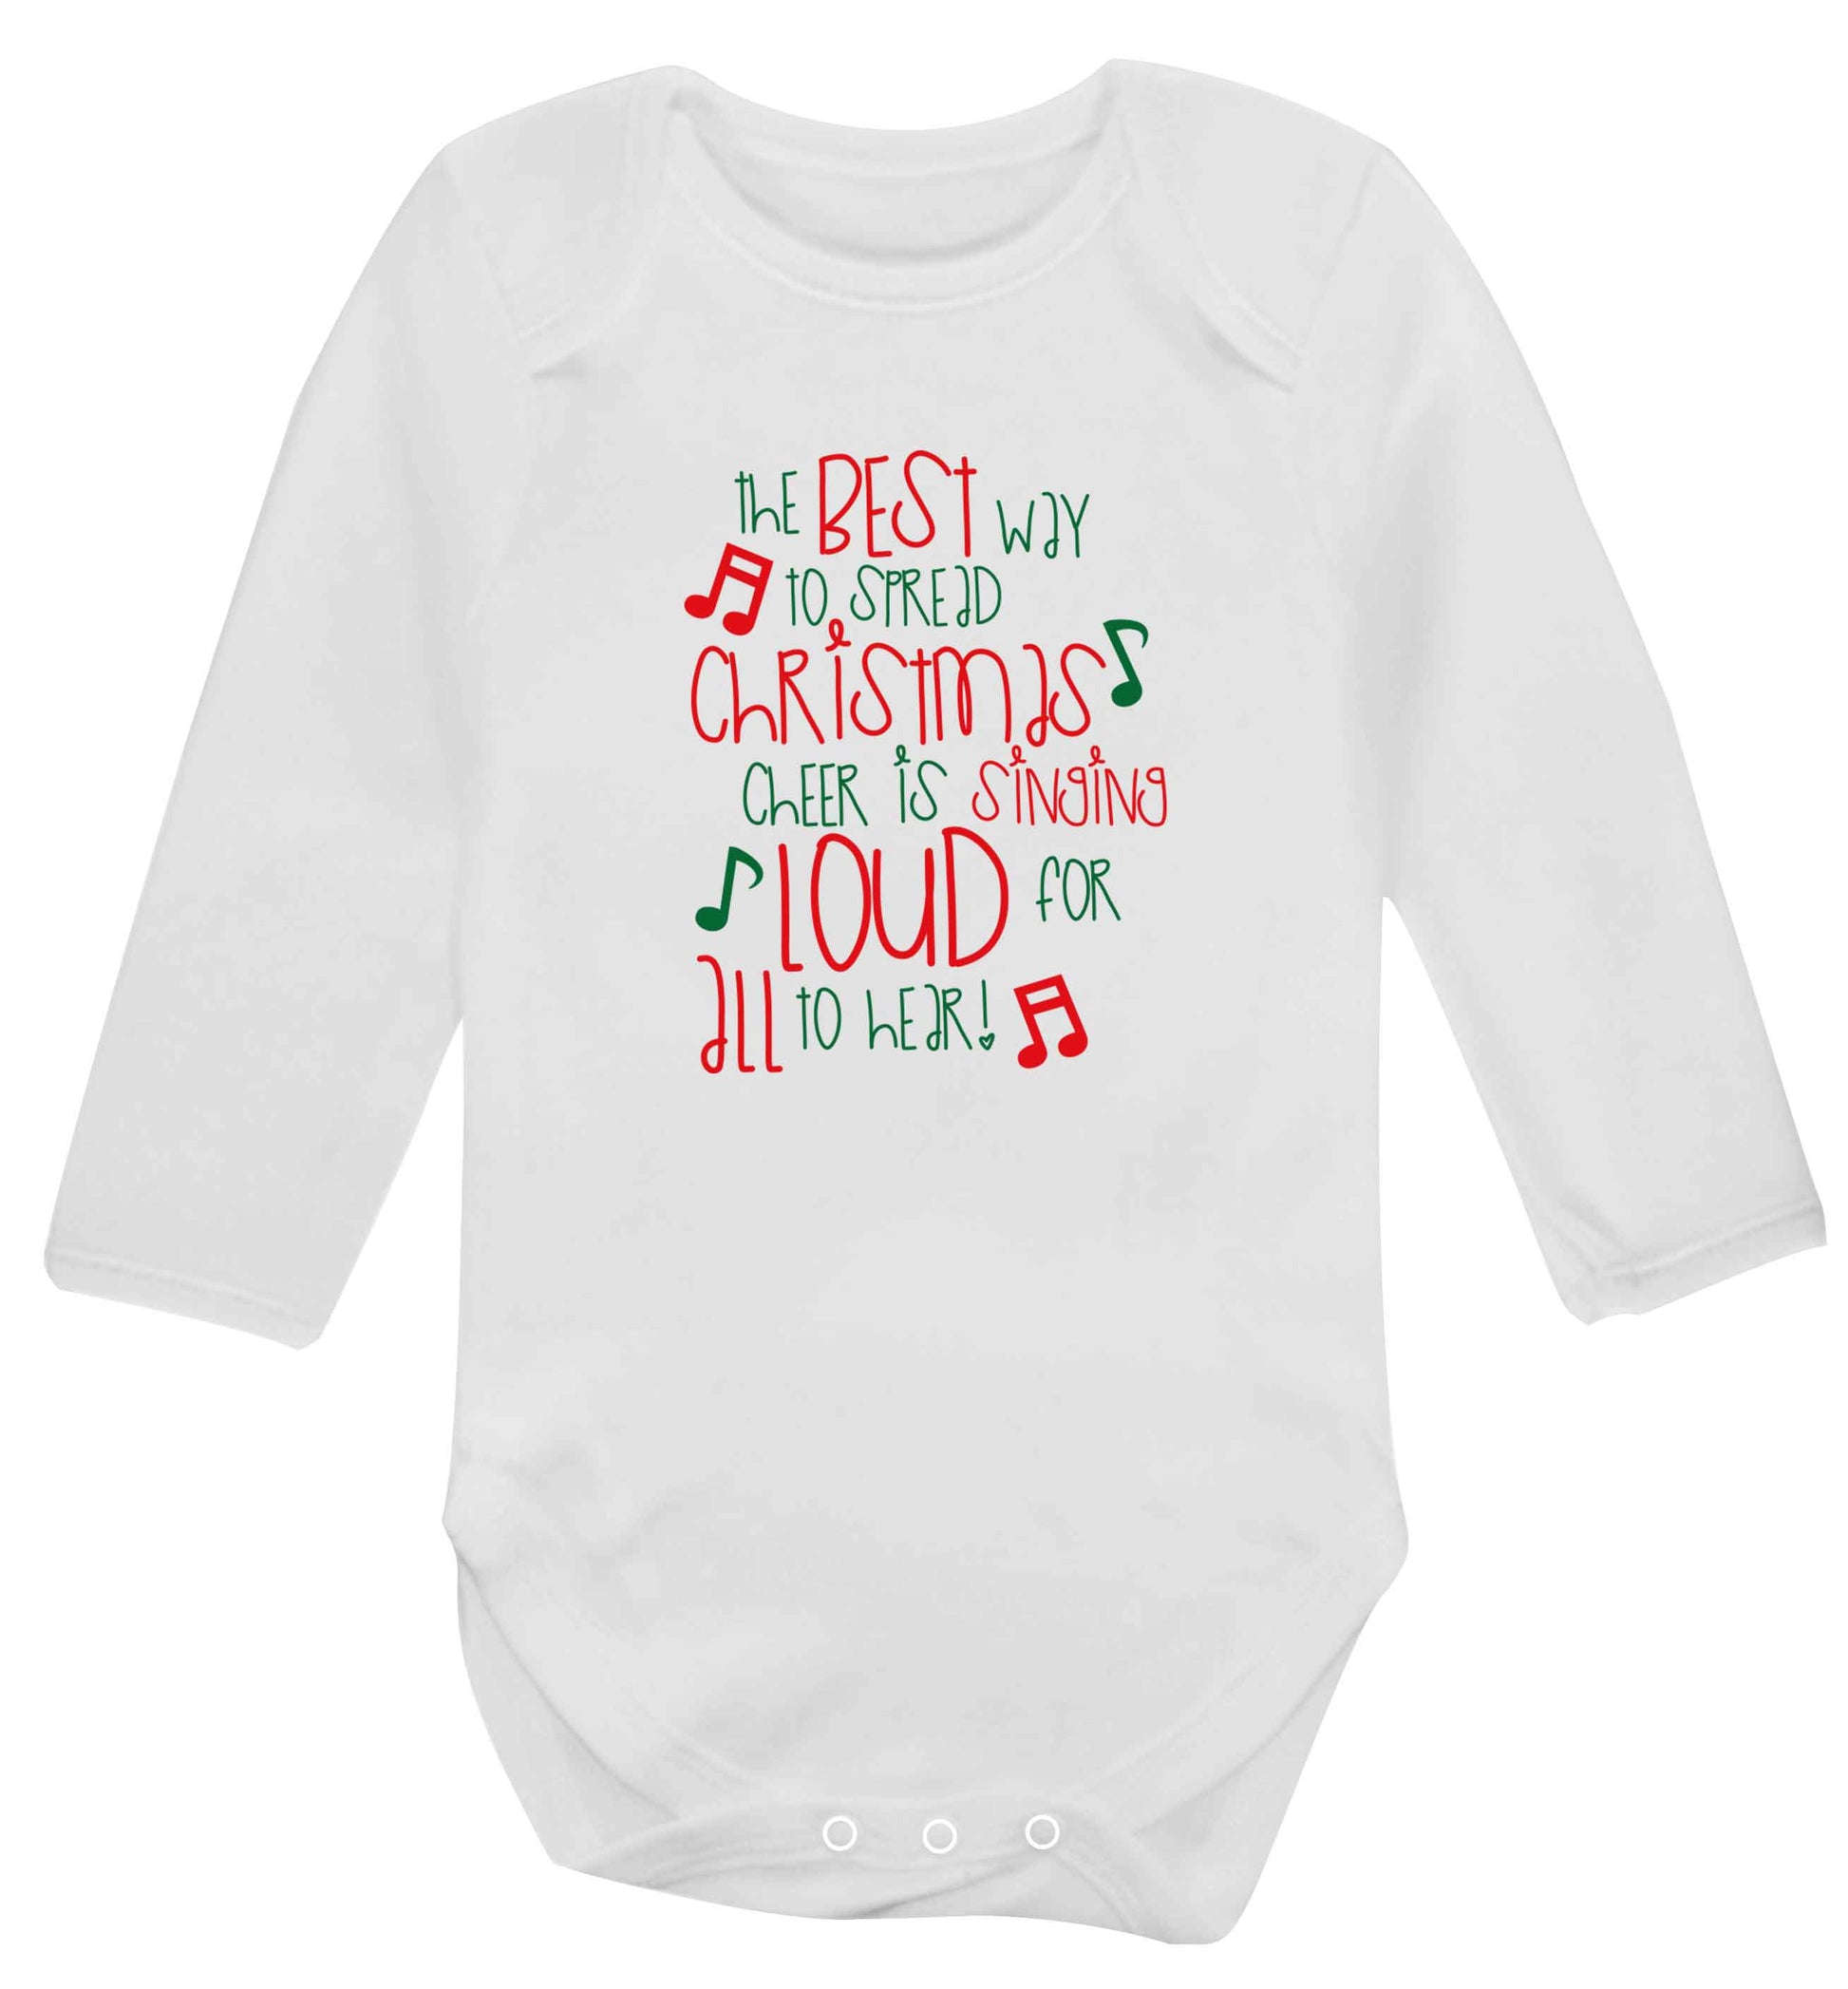 The best way to spread Christmas cheer is singing loud for all to hear baby vest long sleeved white 6-12 months